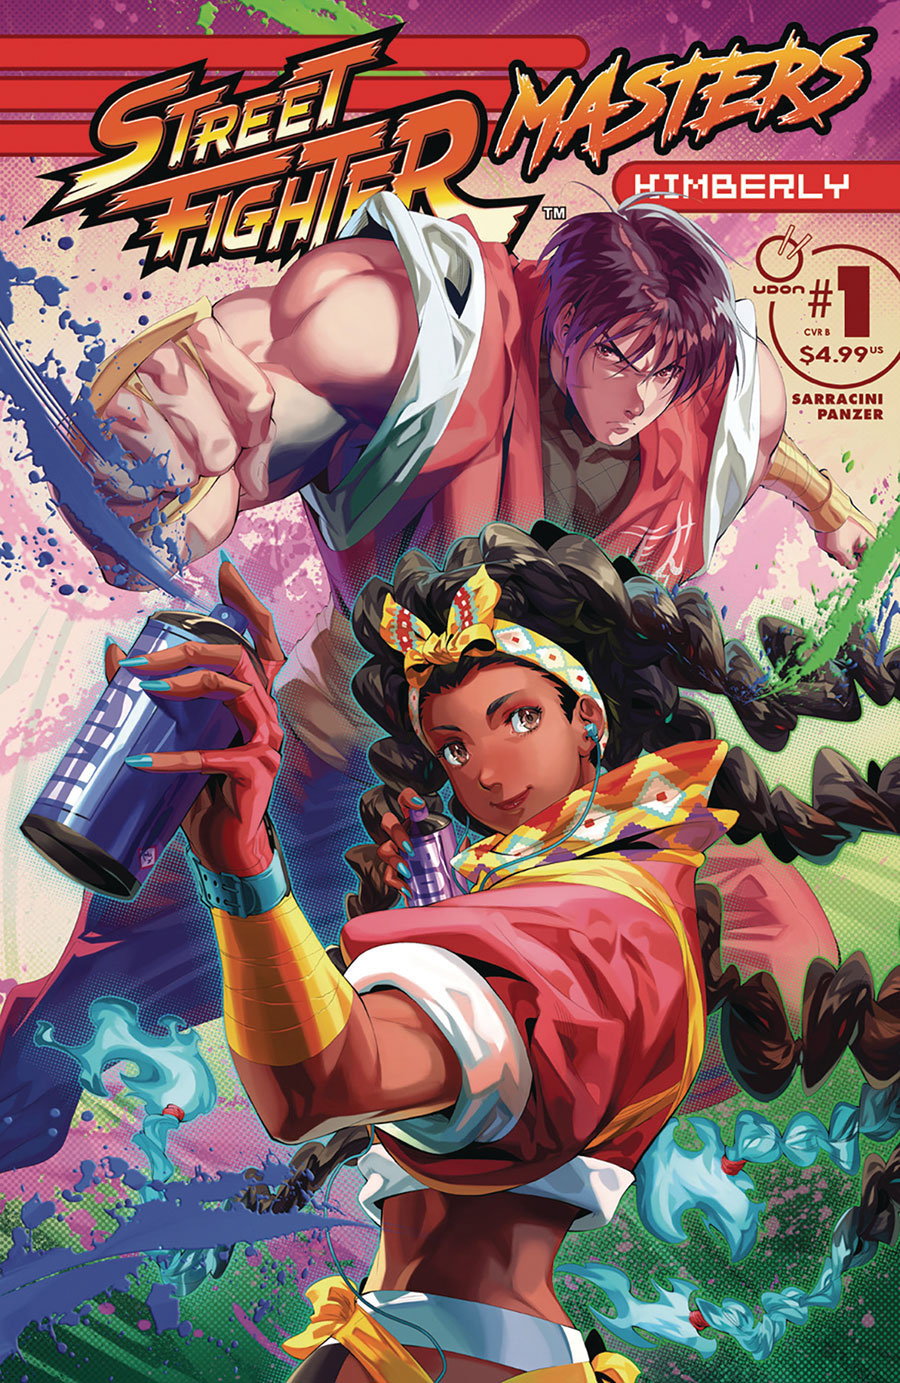 Street Fighter Masters Kimberly #1 (One Shot) Cover B Variant Panzer Cover